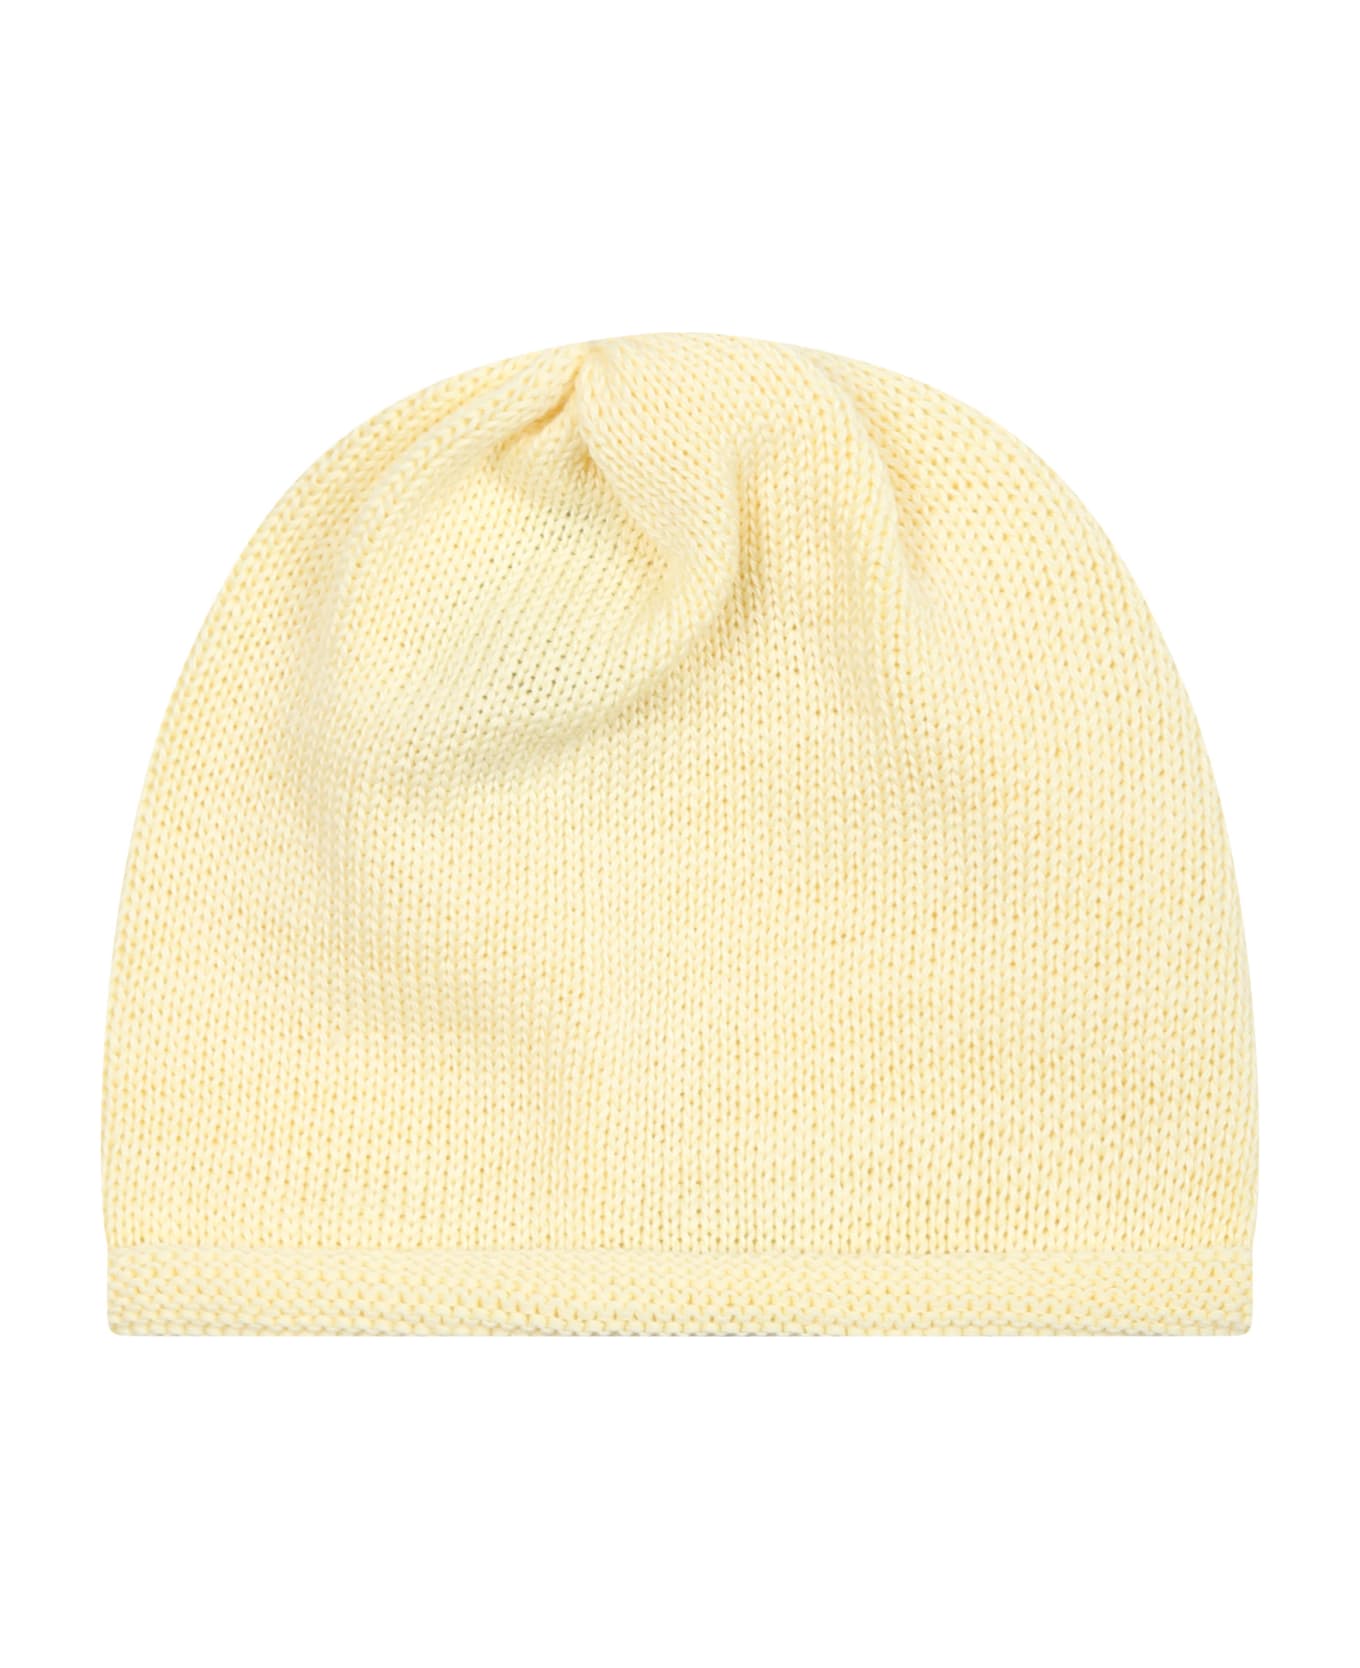 Little Bear Yellow Hat For Baby Kids - Yellow